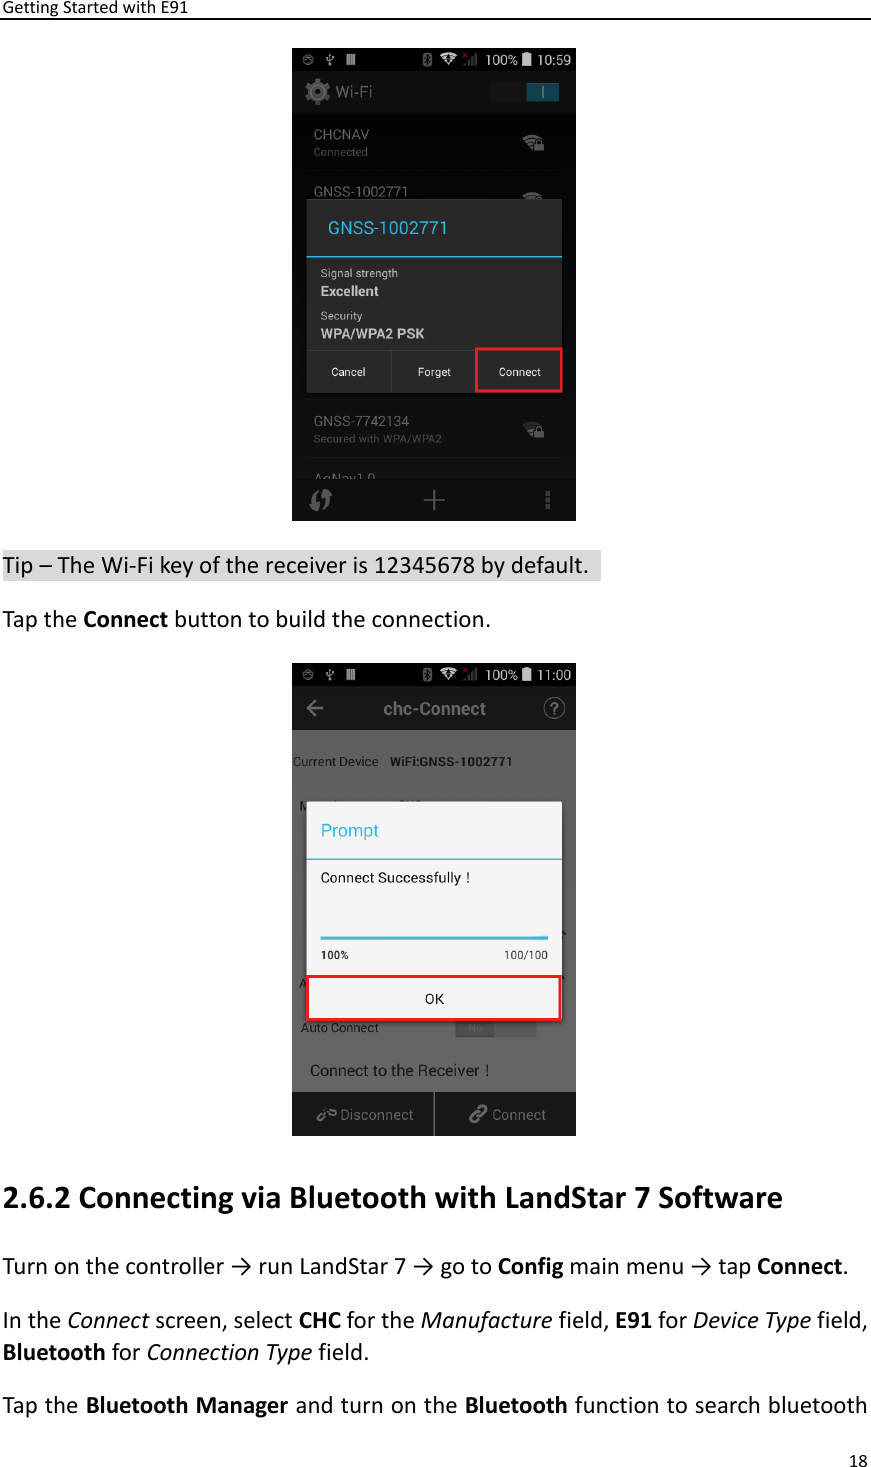 Getting Started with E91 18   Tip – The Wi-Fi key of the receiver is 12345678 by default.   Tap the Connect button to build the connection.    2.6.2 Connecting via Bluetooth with LandStar 7 Software Turn on the controller → run LandStar 7 → go to Config main menu → tap Connect. In the Connect screen, select CHC for the Manufacture field, E91 for Device Type field, Bluetooth for Connection Type field. Tap the Bluetooth Manager and turn on the Bluetooth function to search bluetooth 